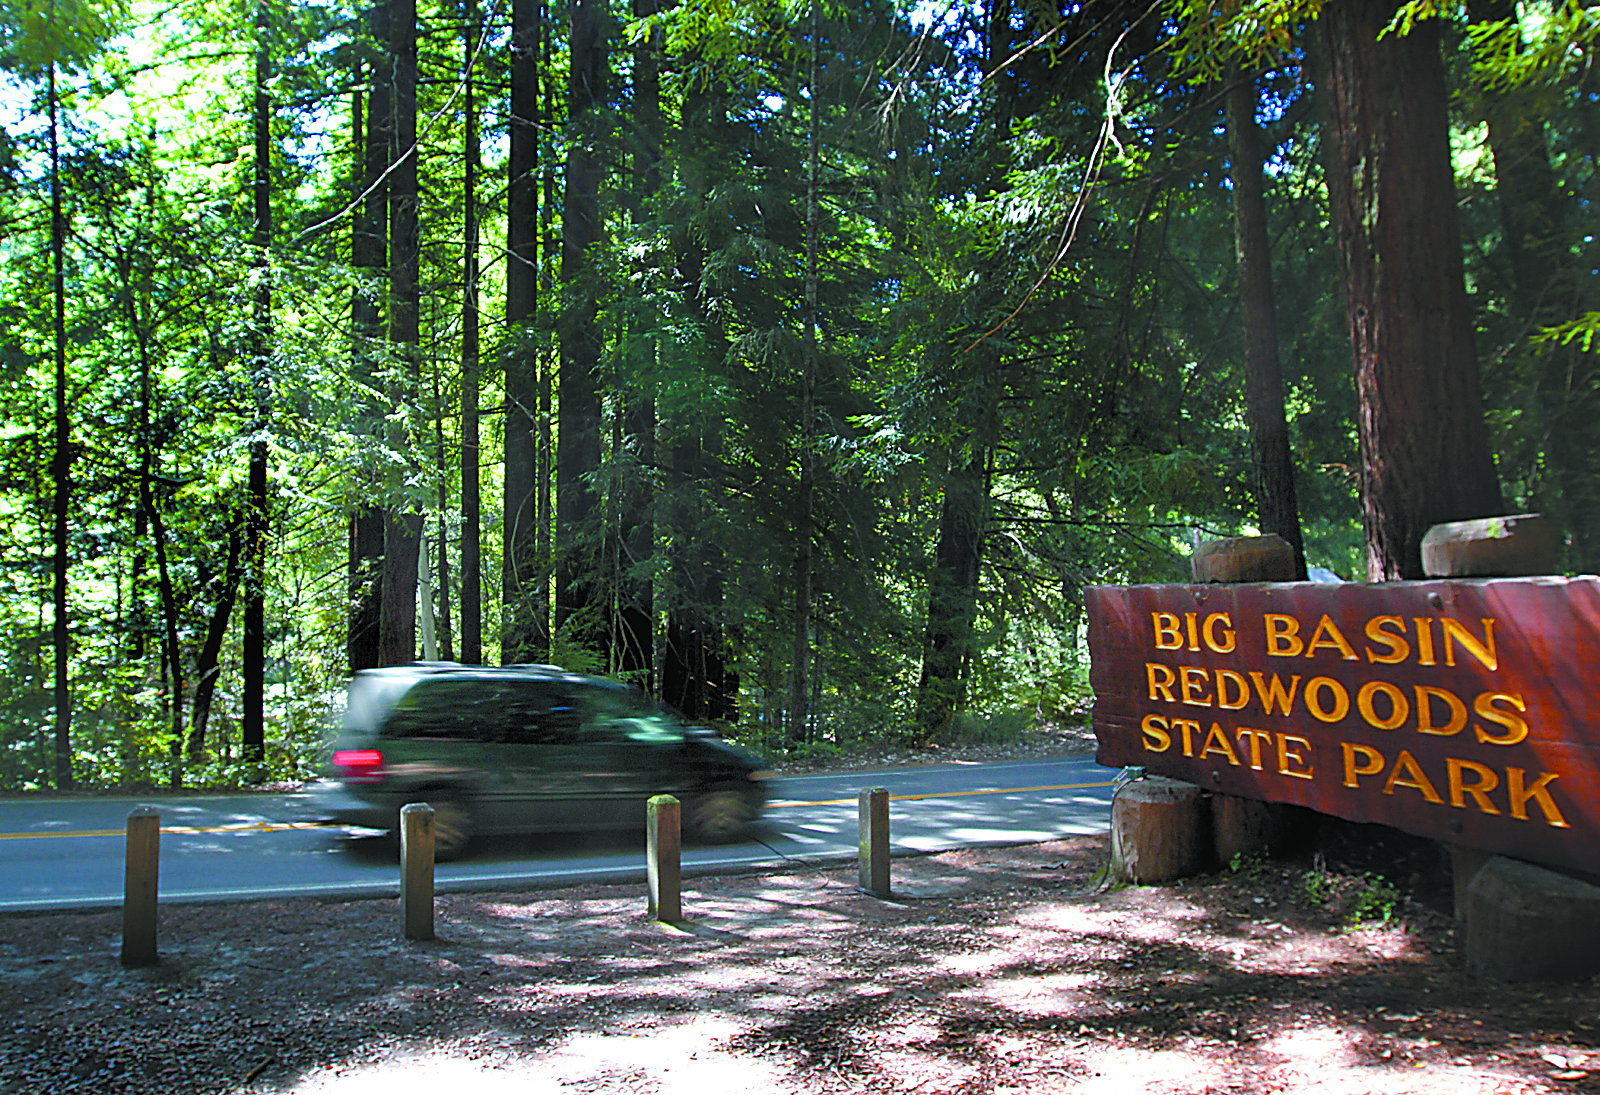 Entry to a Big Basin Redwoods State Park